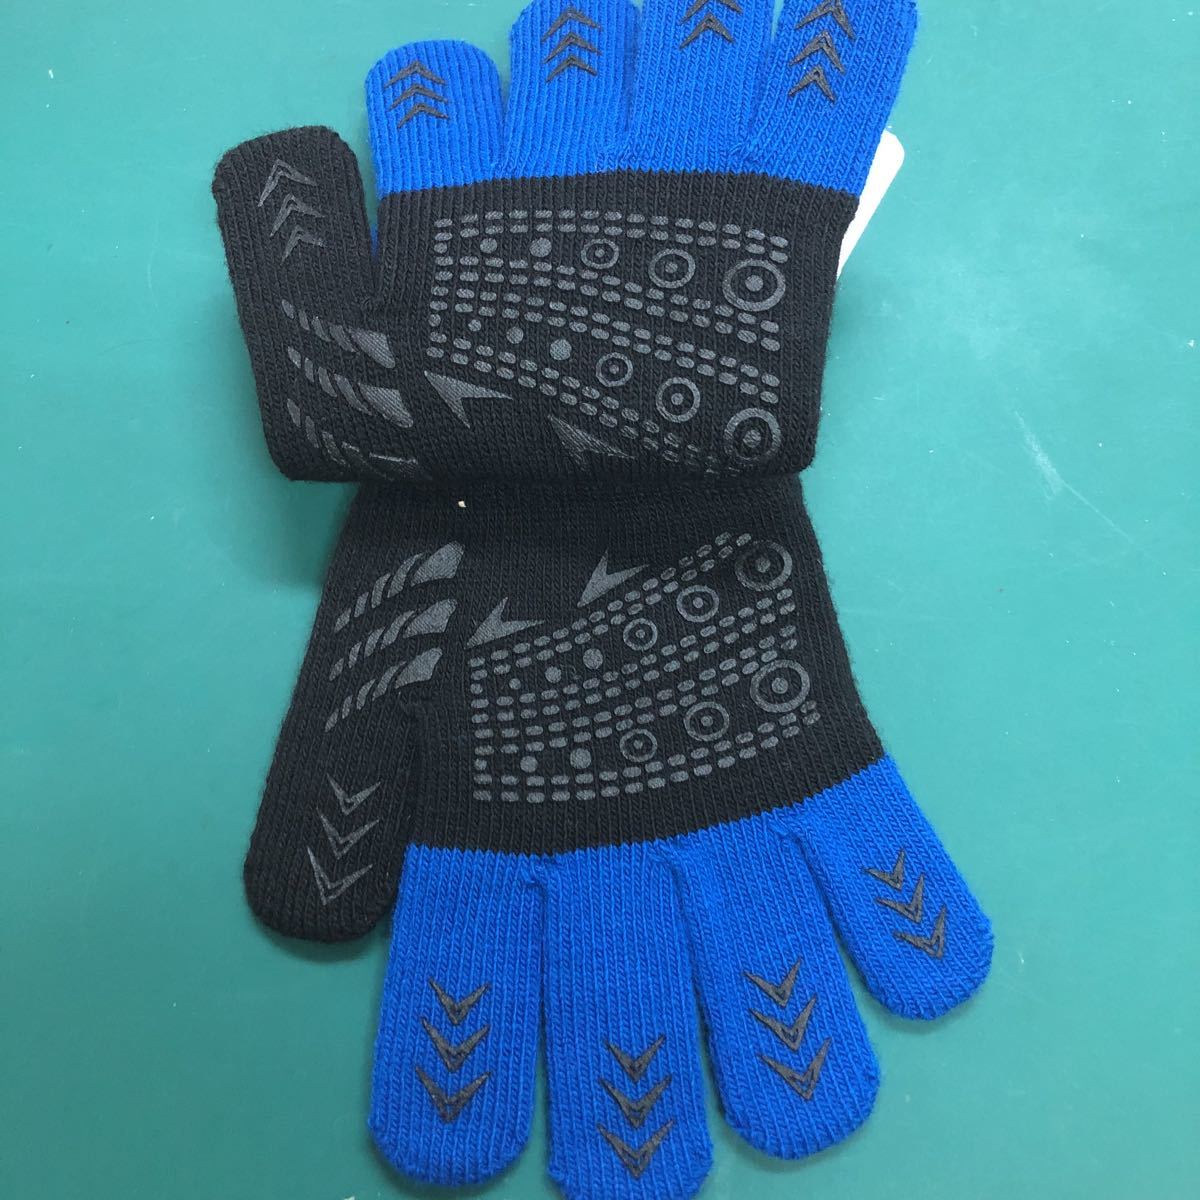  tag attaching . pair Junior knitted gloves blue 